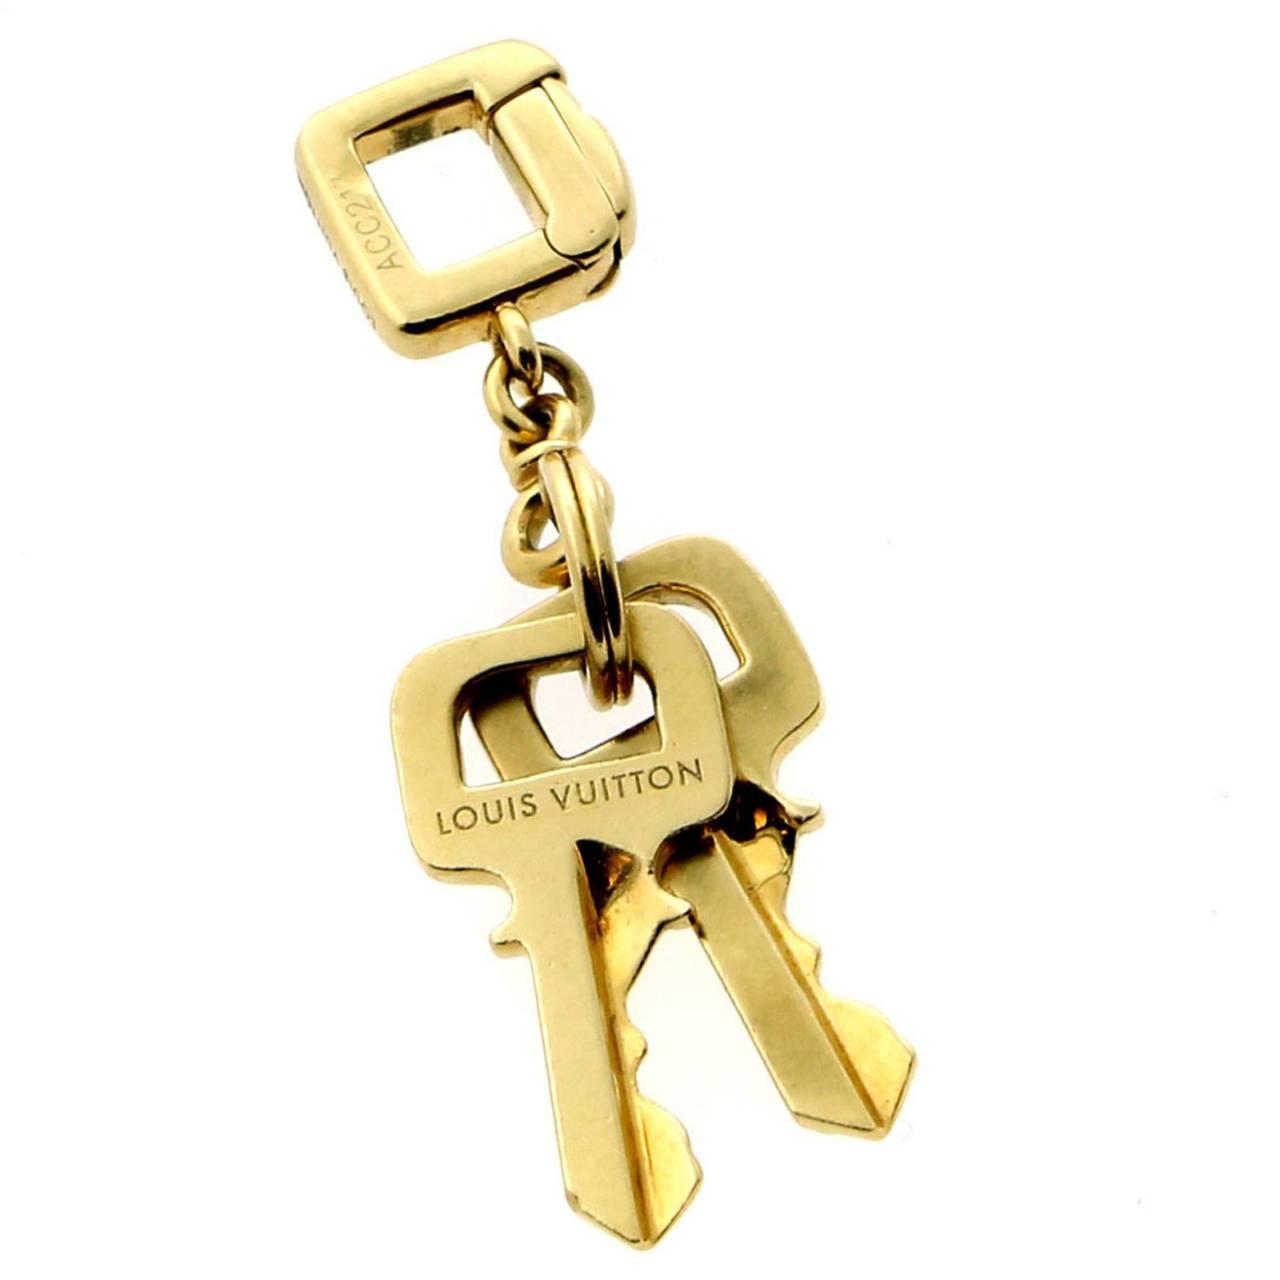 Louis Vuitton Gold Key Charm Pendant For Sale at 1stdibs